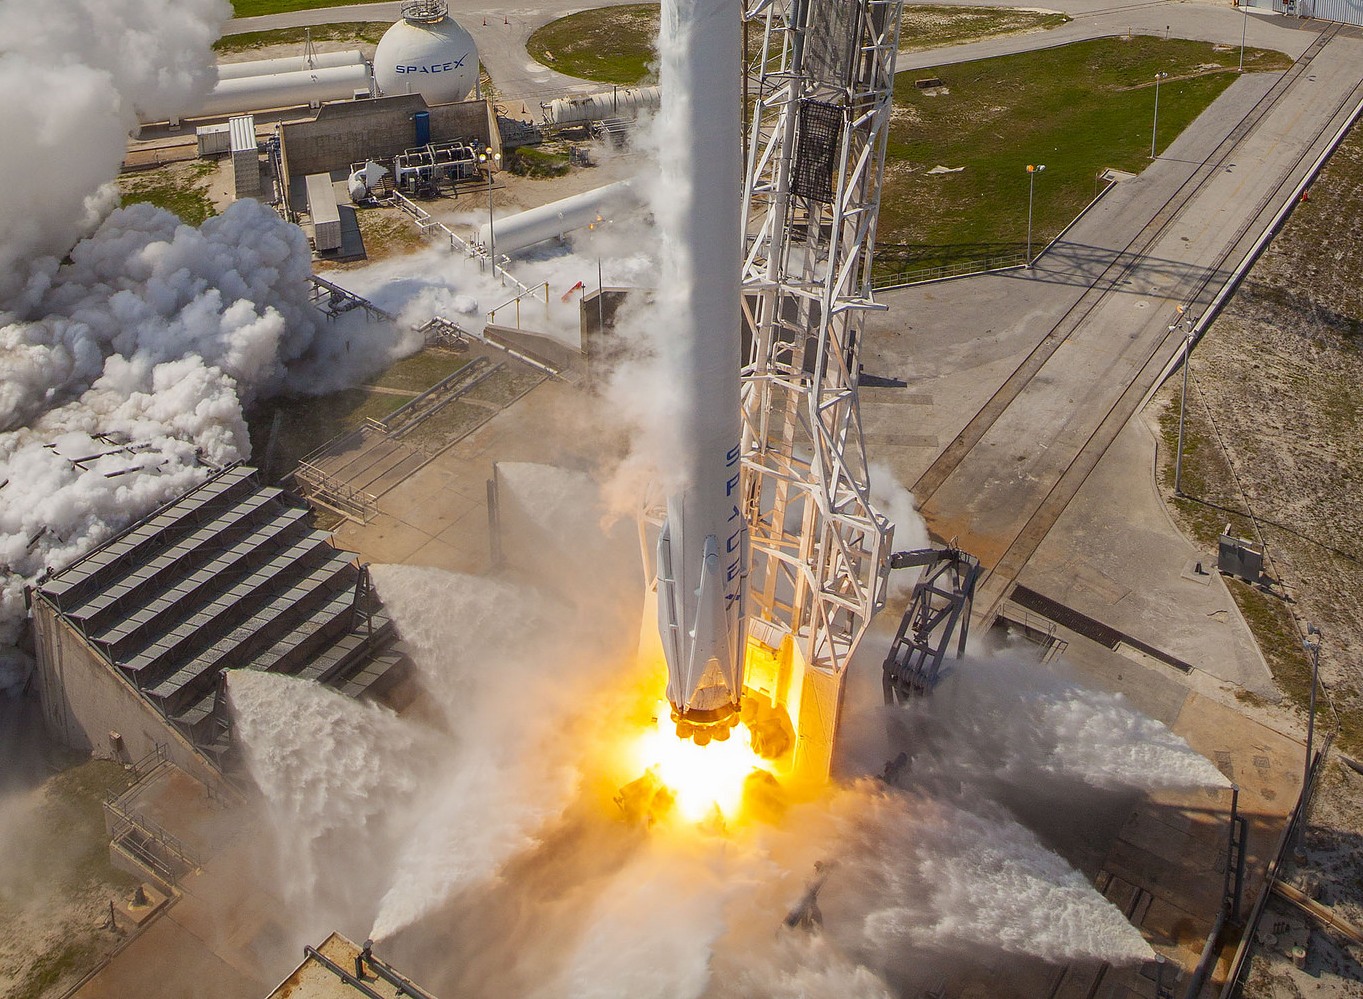 [Updated with video] Major explosion during a test firing of SpaceX’s rocket | Ars ...